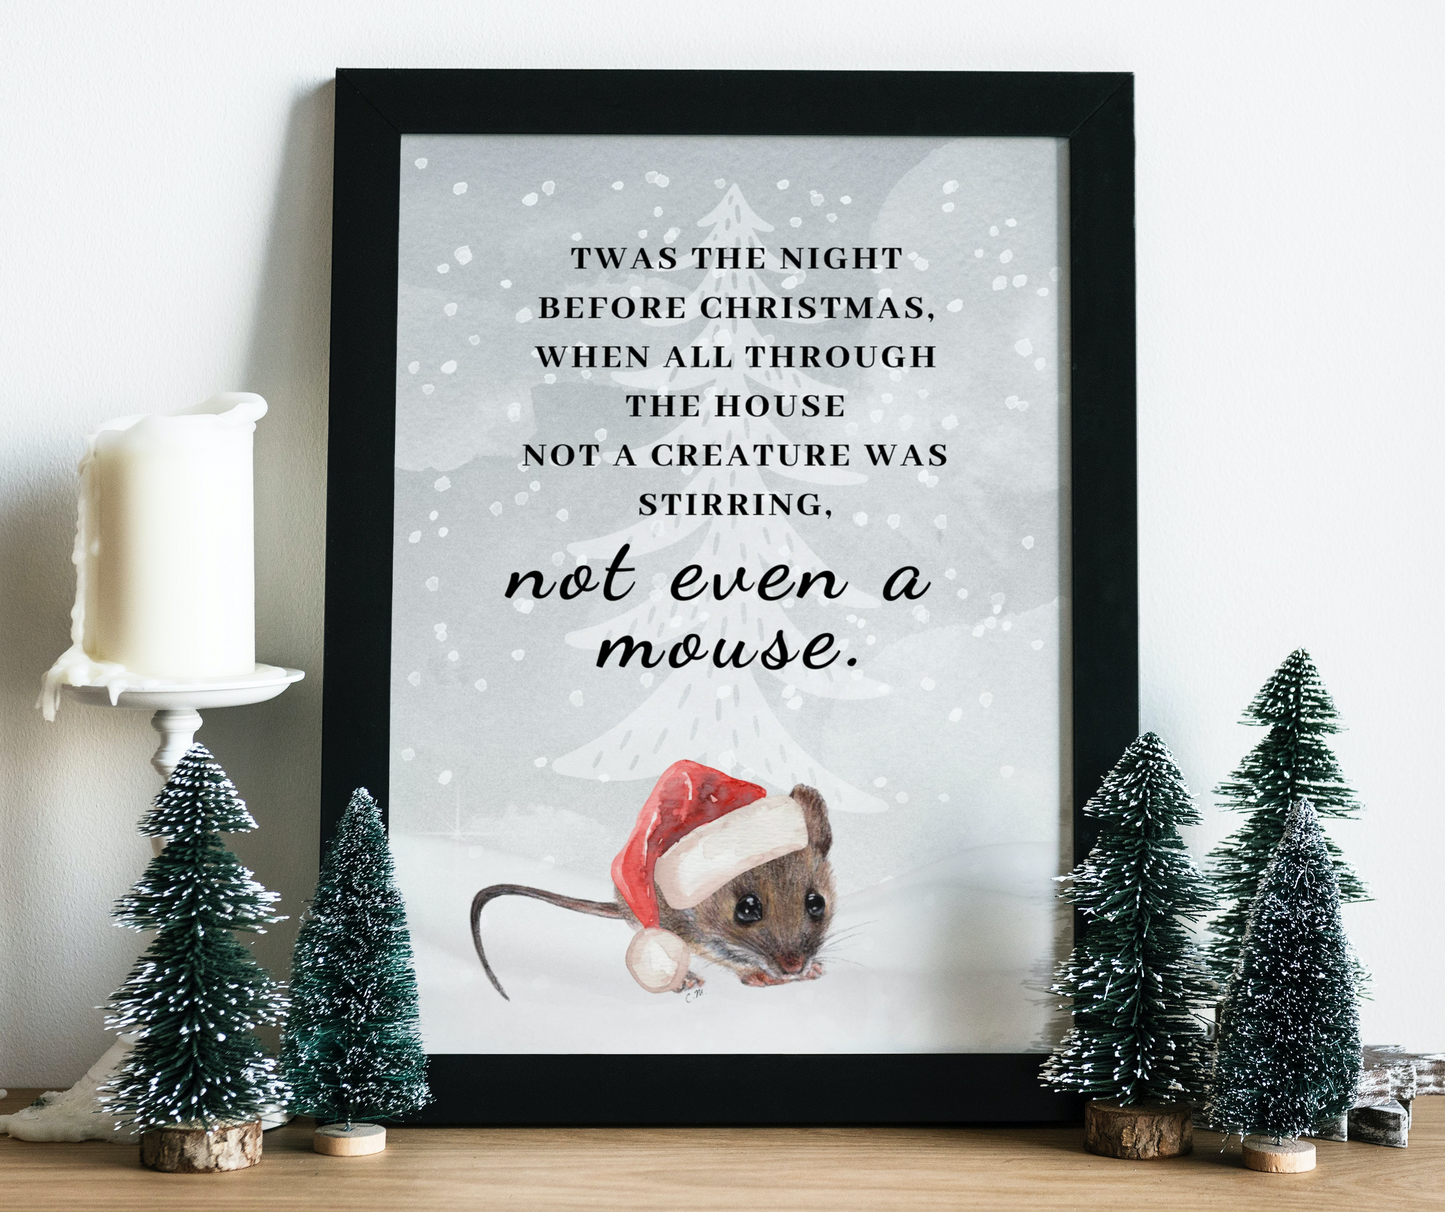 Mouse Christmas decor, Twas the night before Christmas, Not a creature stirring, Santa mouse art, Cute mouse holiday decor, Festive mouse